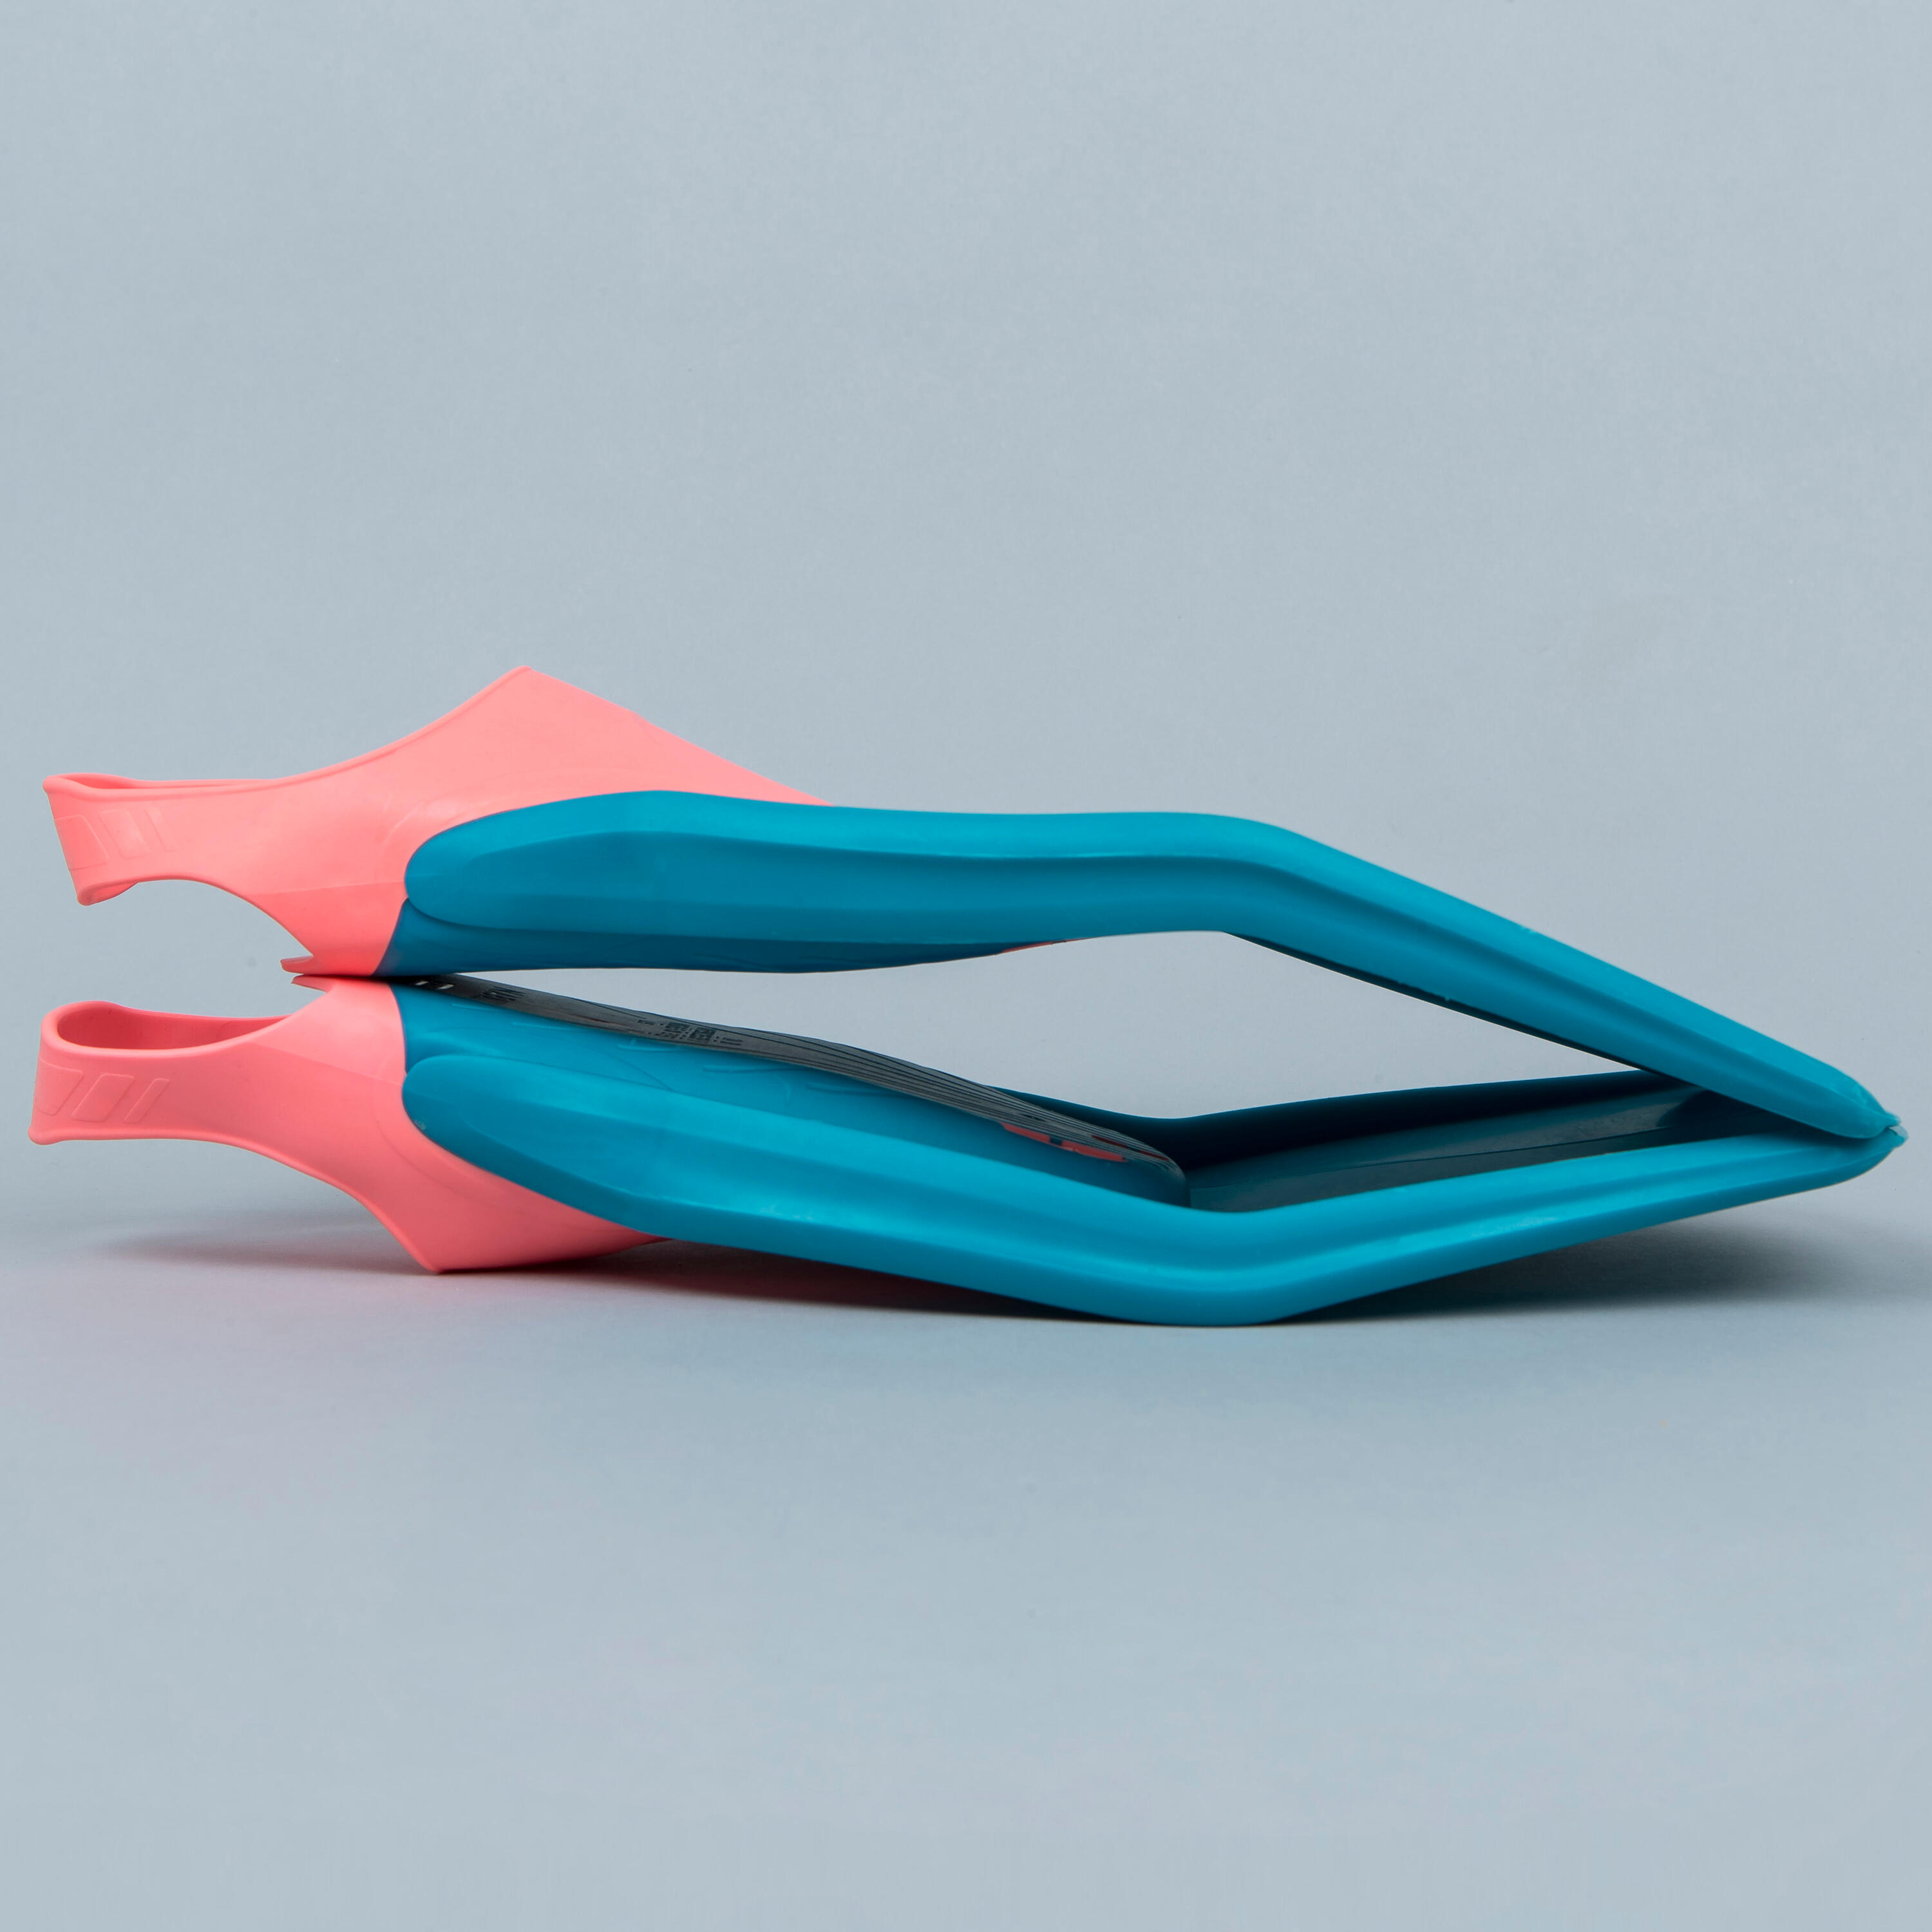 Swimming Fins - Tonifins 500 Blue - Teal blue, Fluo peach - Nabaiji ...